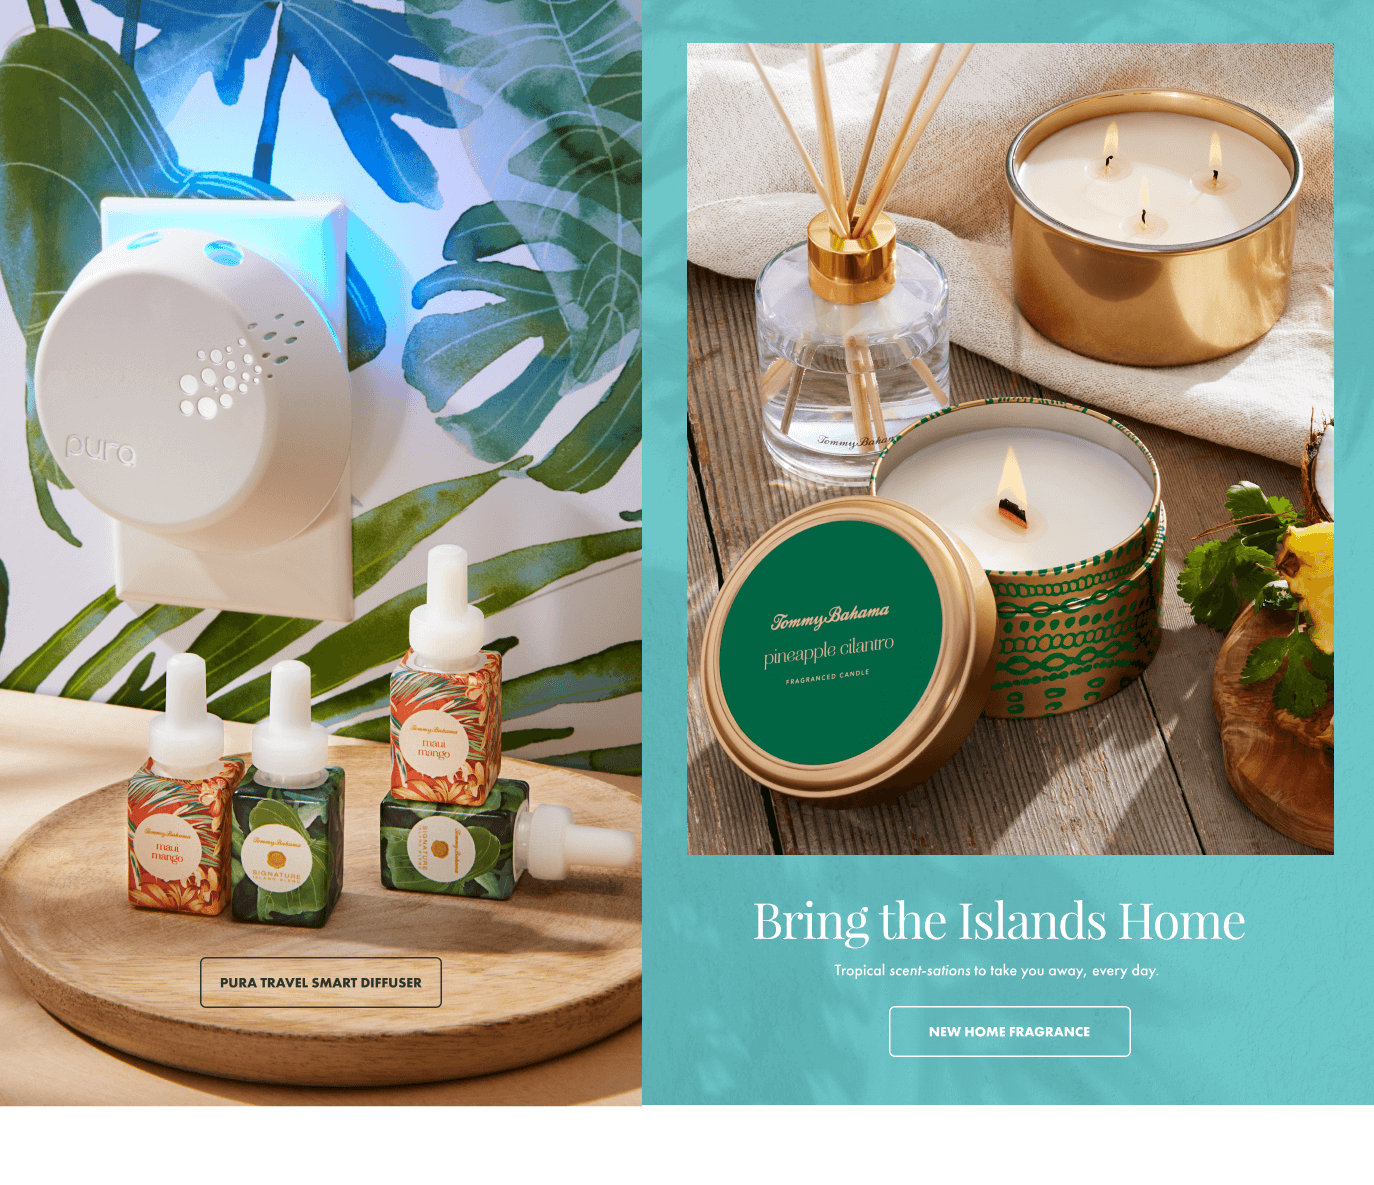 Bring The Islands Home - New Home Fragrance & Pura Travel Smart Diffuser